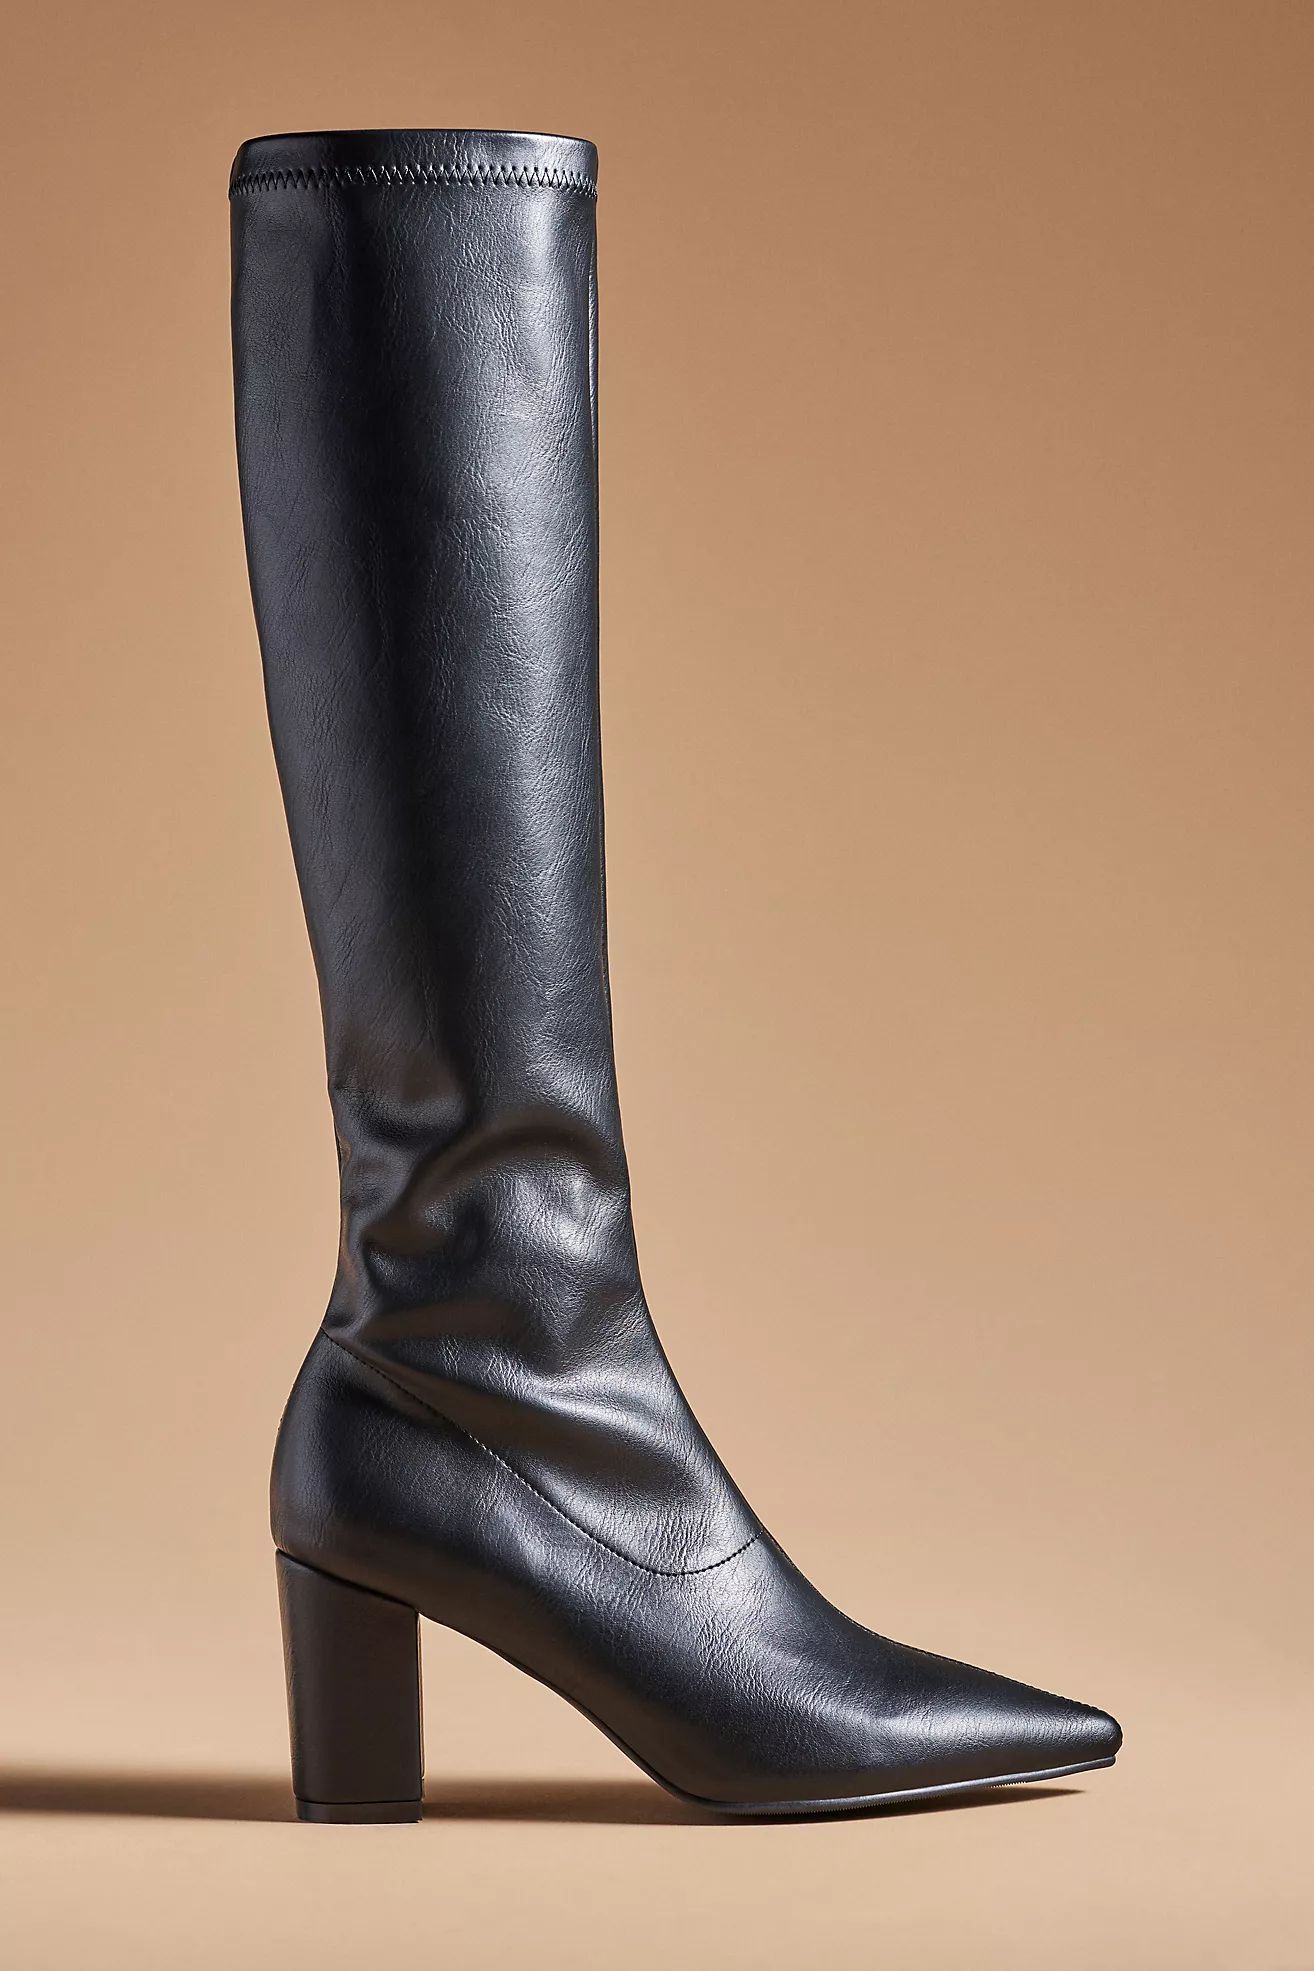 Silent D Comess Knee-High Boots | Anthropologie (US)